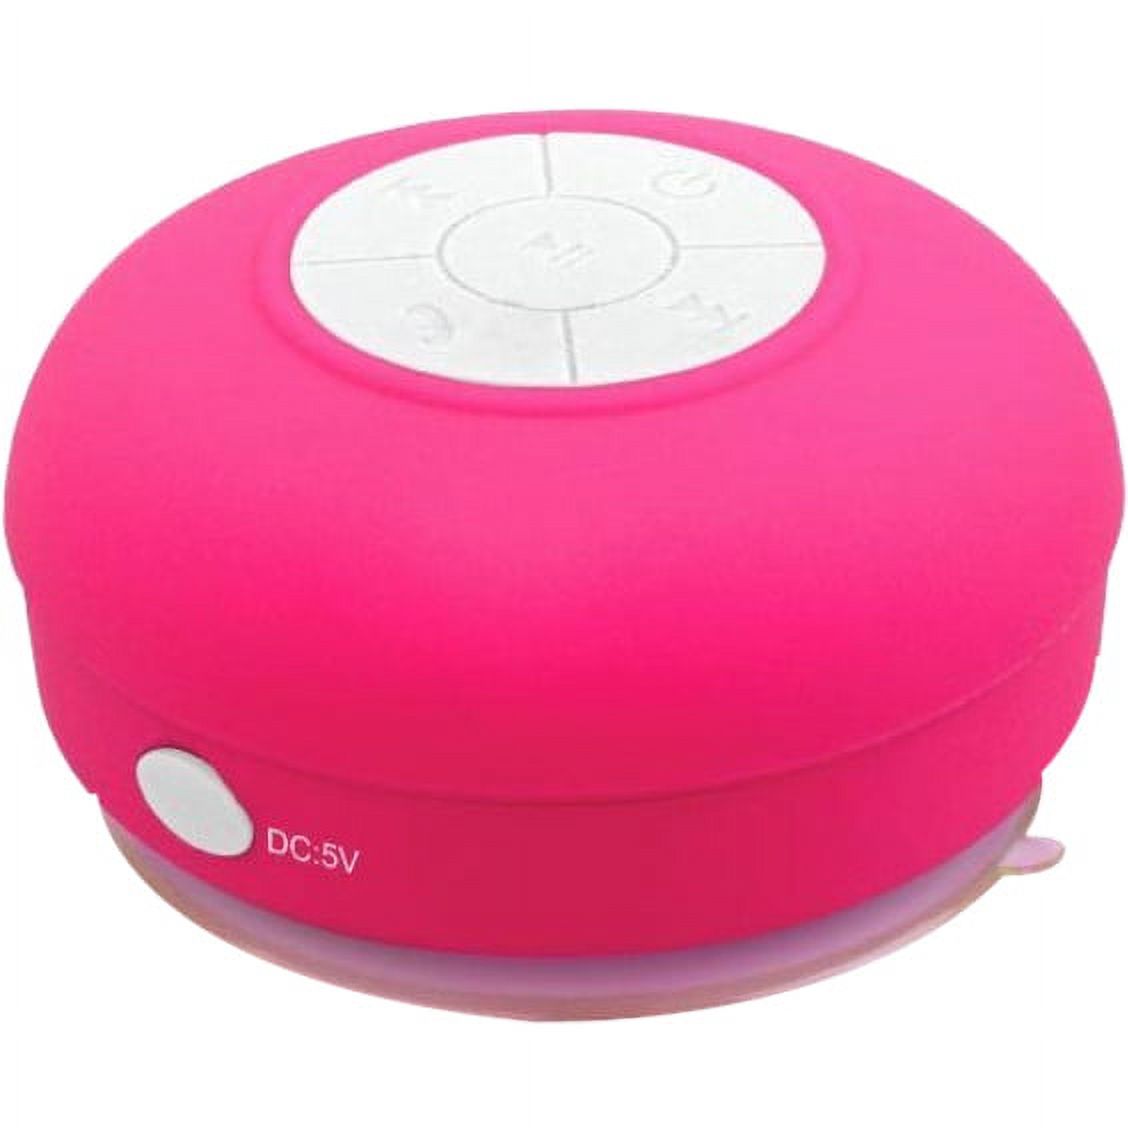 Supersonic Bluetooth Speaker System, Pink - image 2 of 2